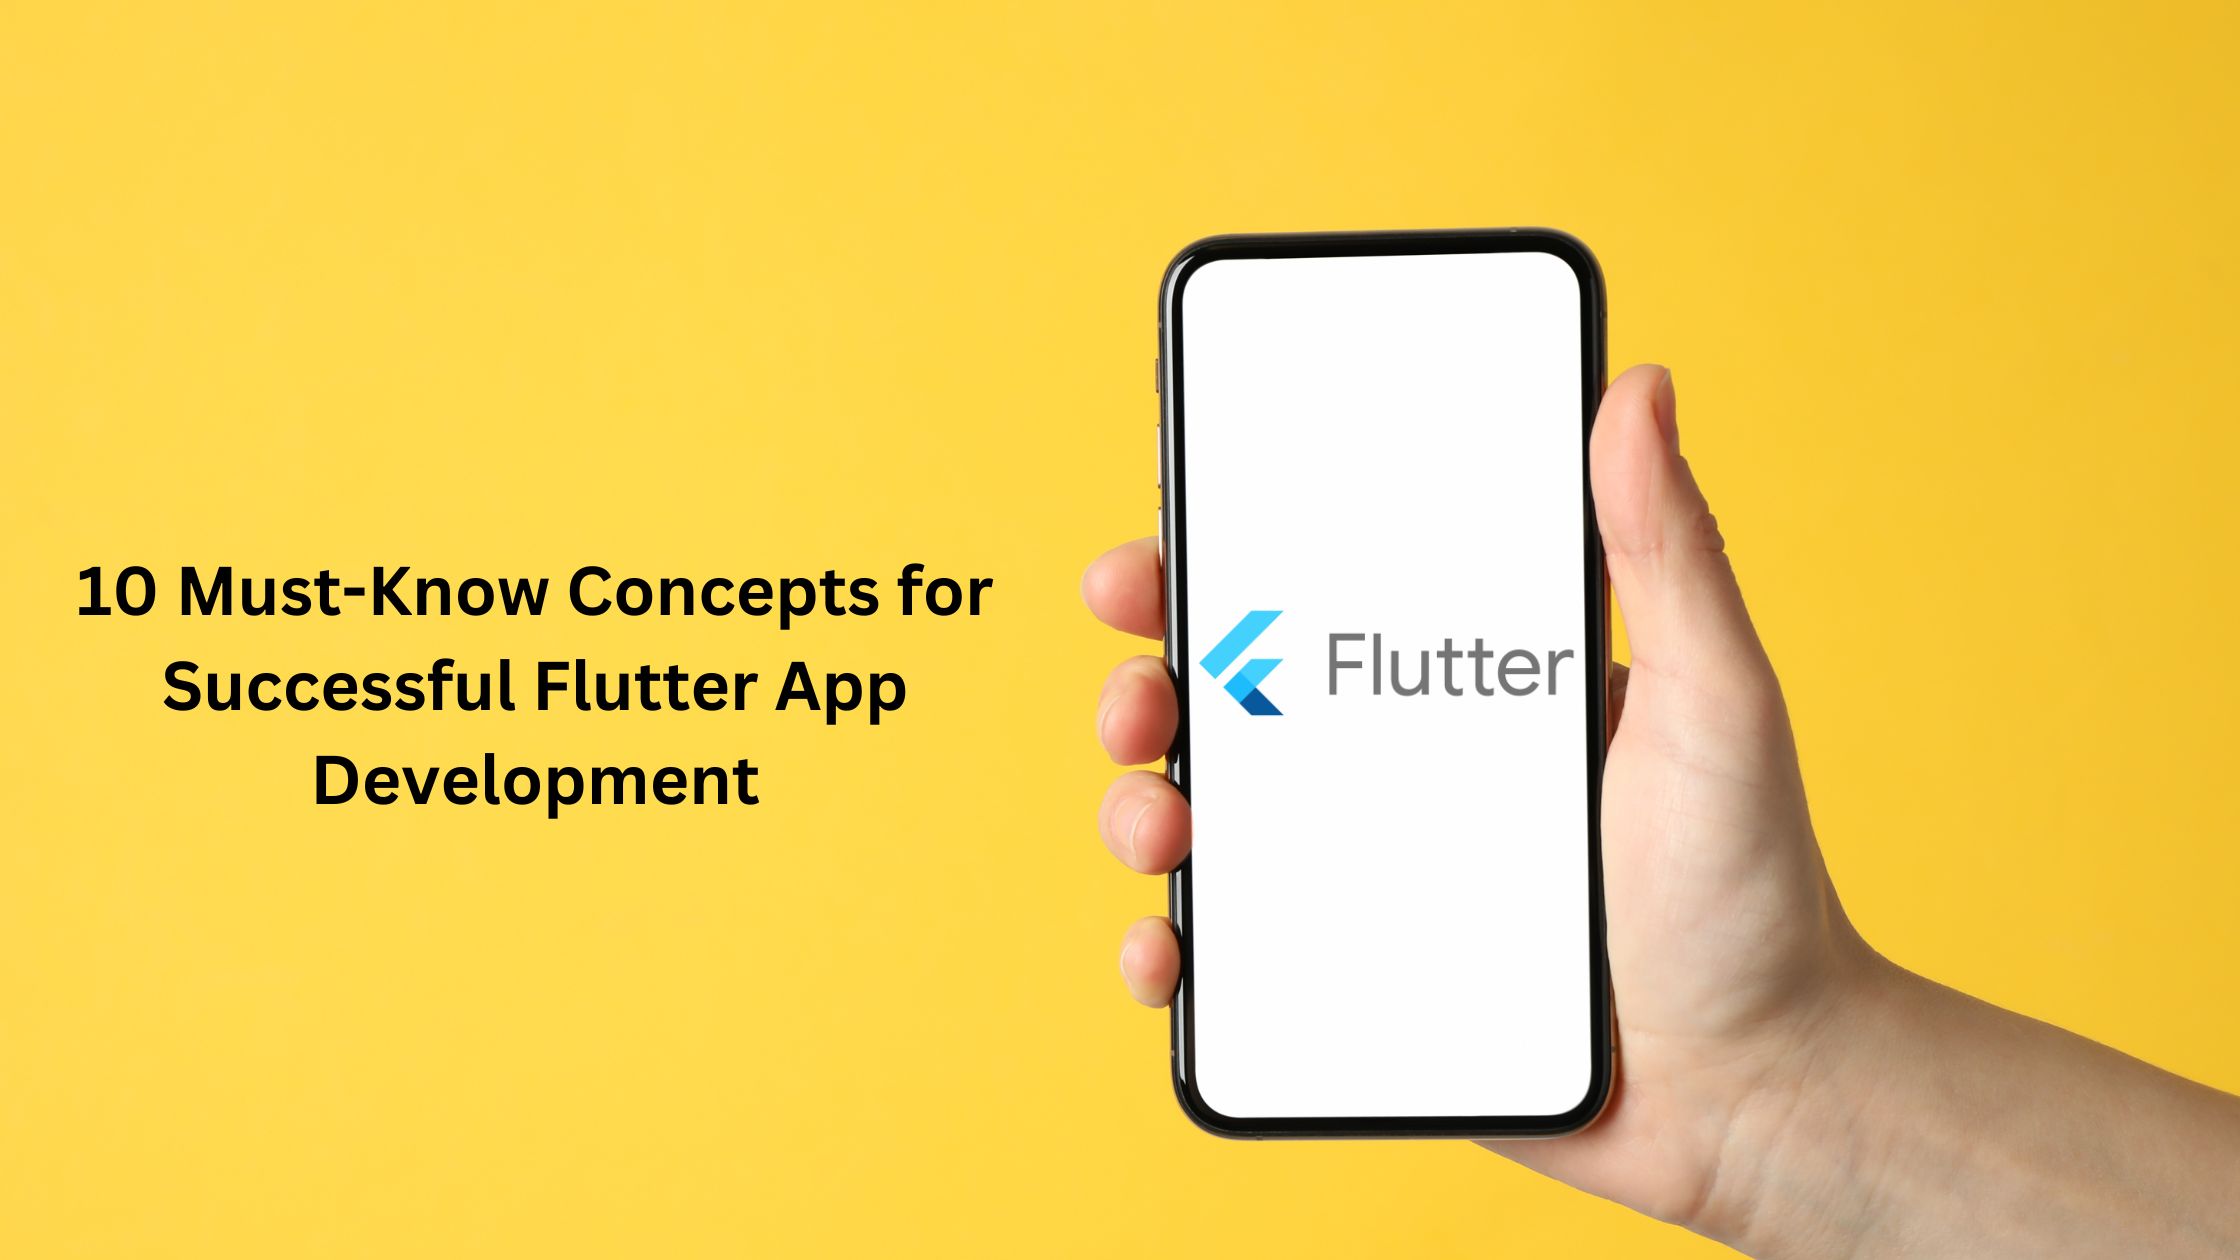 10 Must-Know Concepts for Successful Flutter App Development